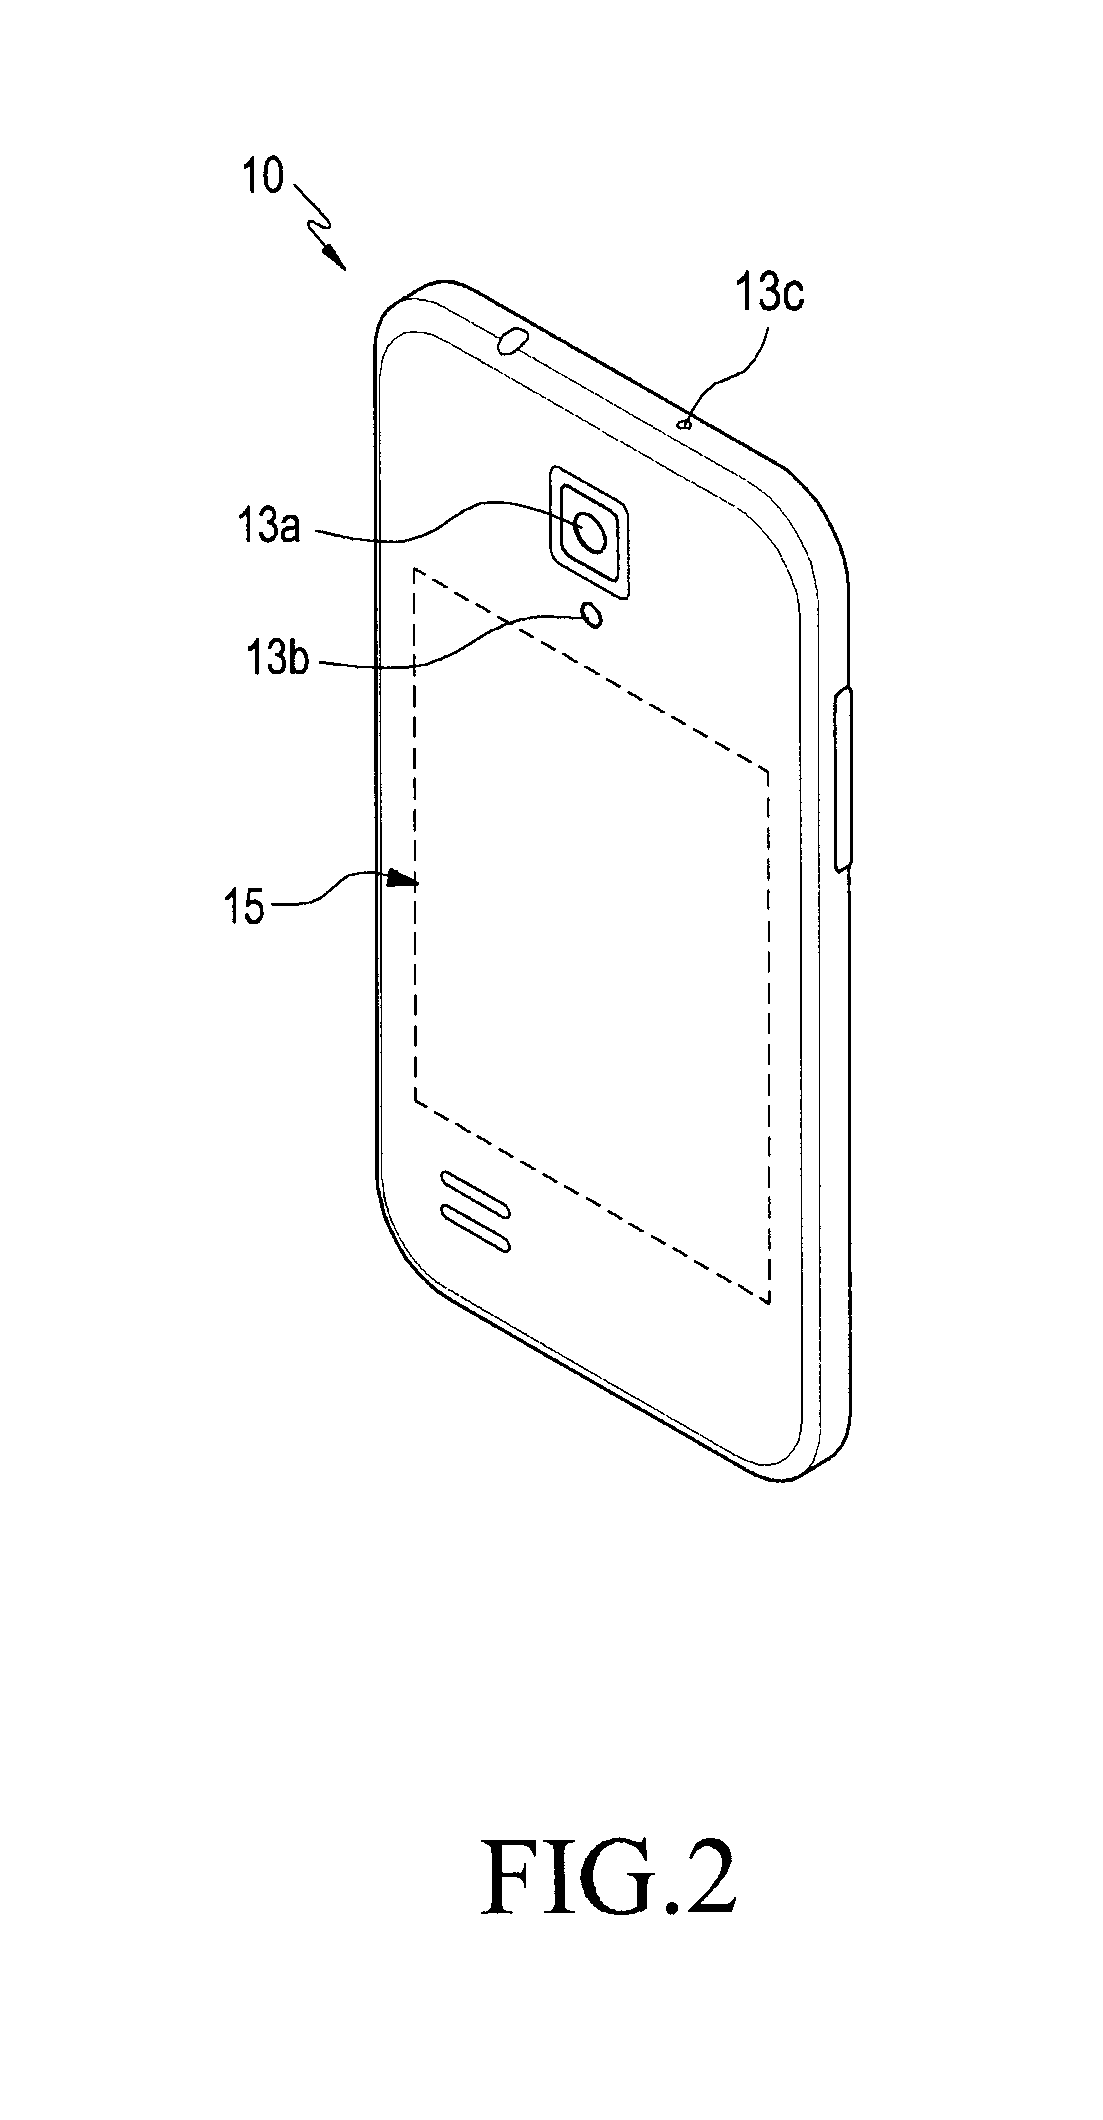 Near-field communication antenna device and electronic device having same